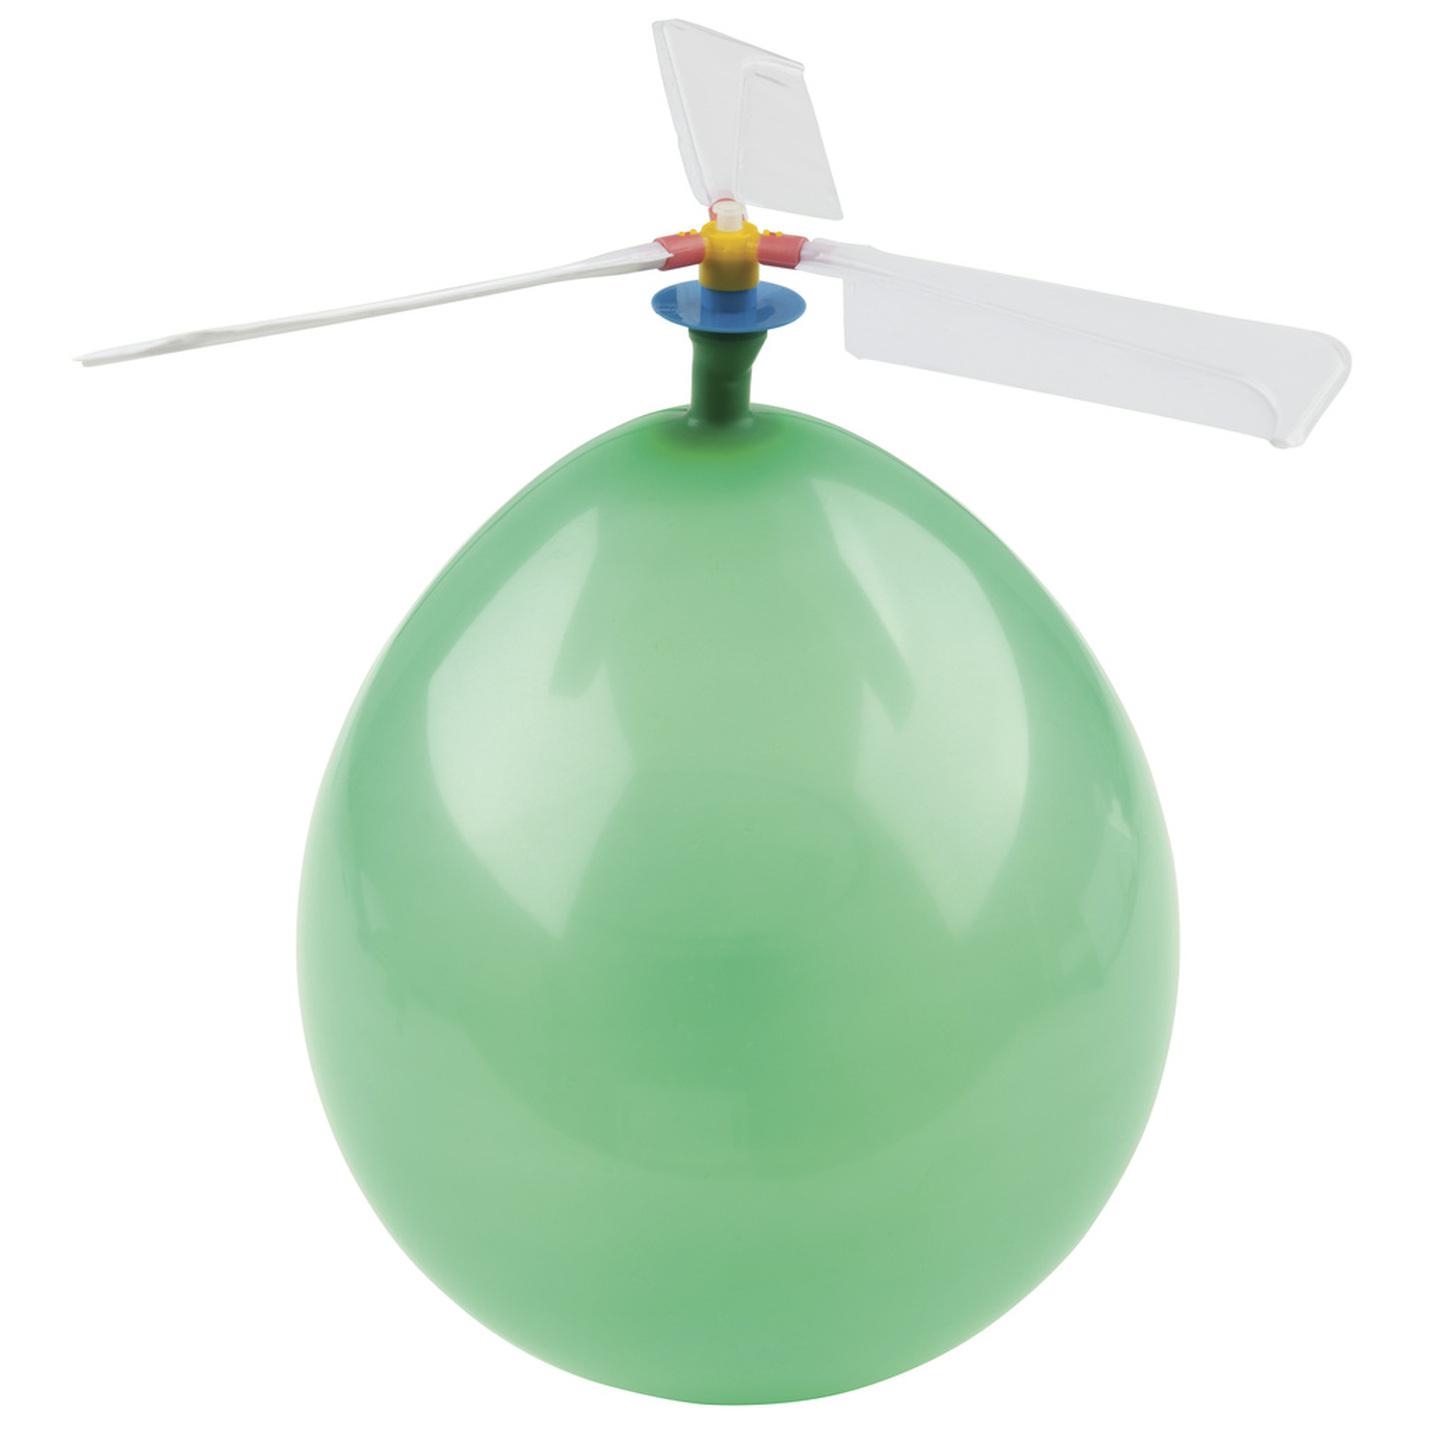 Balloon Powered Helicopter Propulsion Kit